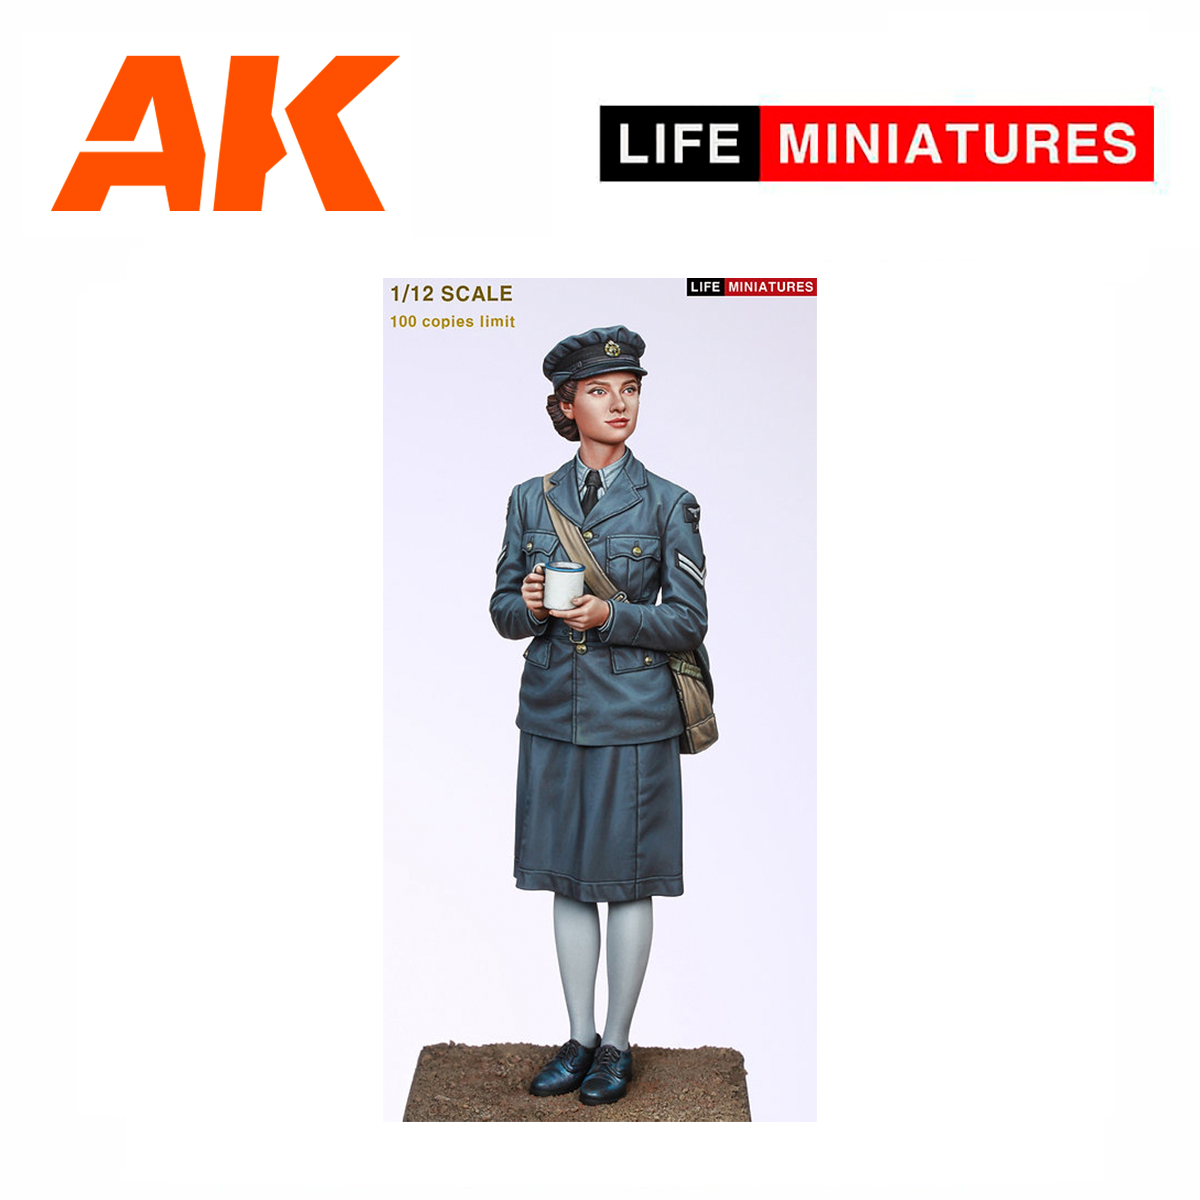 Life Miniatures – WAAF Assistant Section Leader 1940-1941 1/12